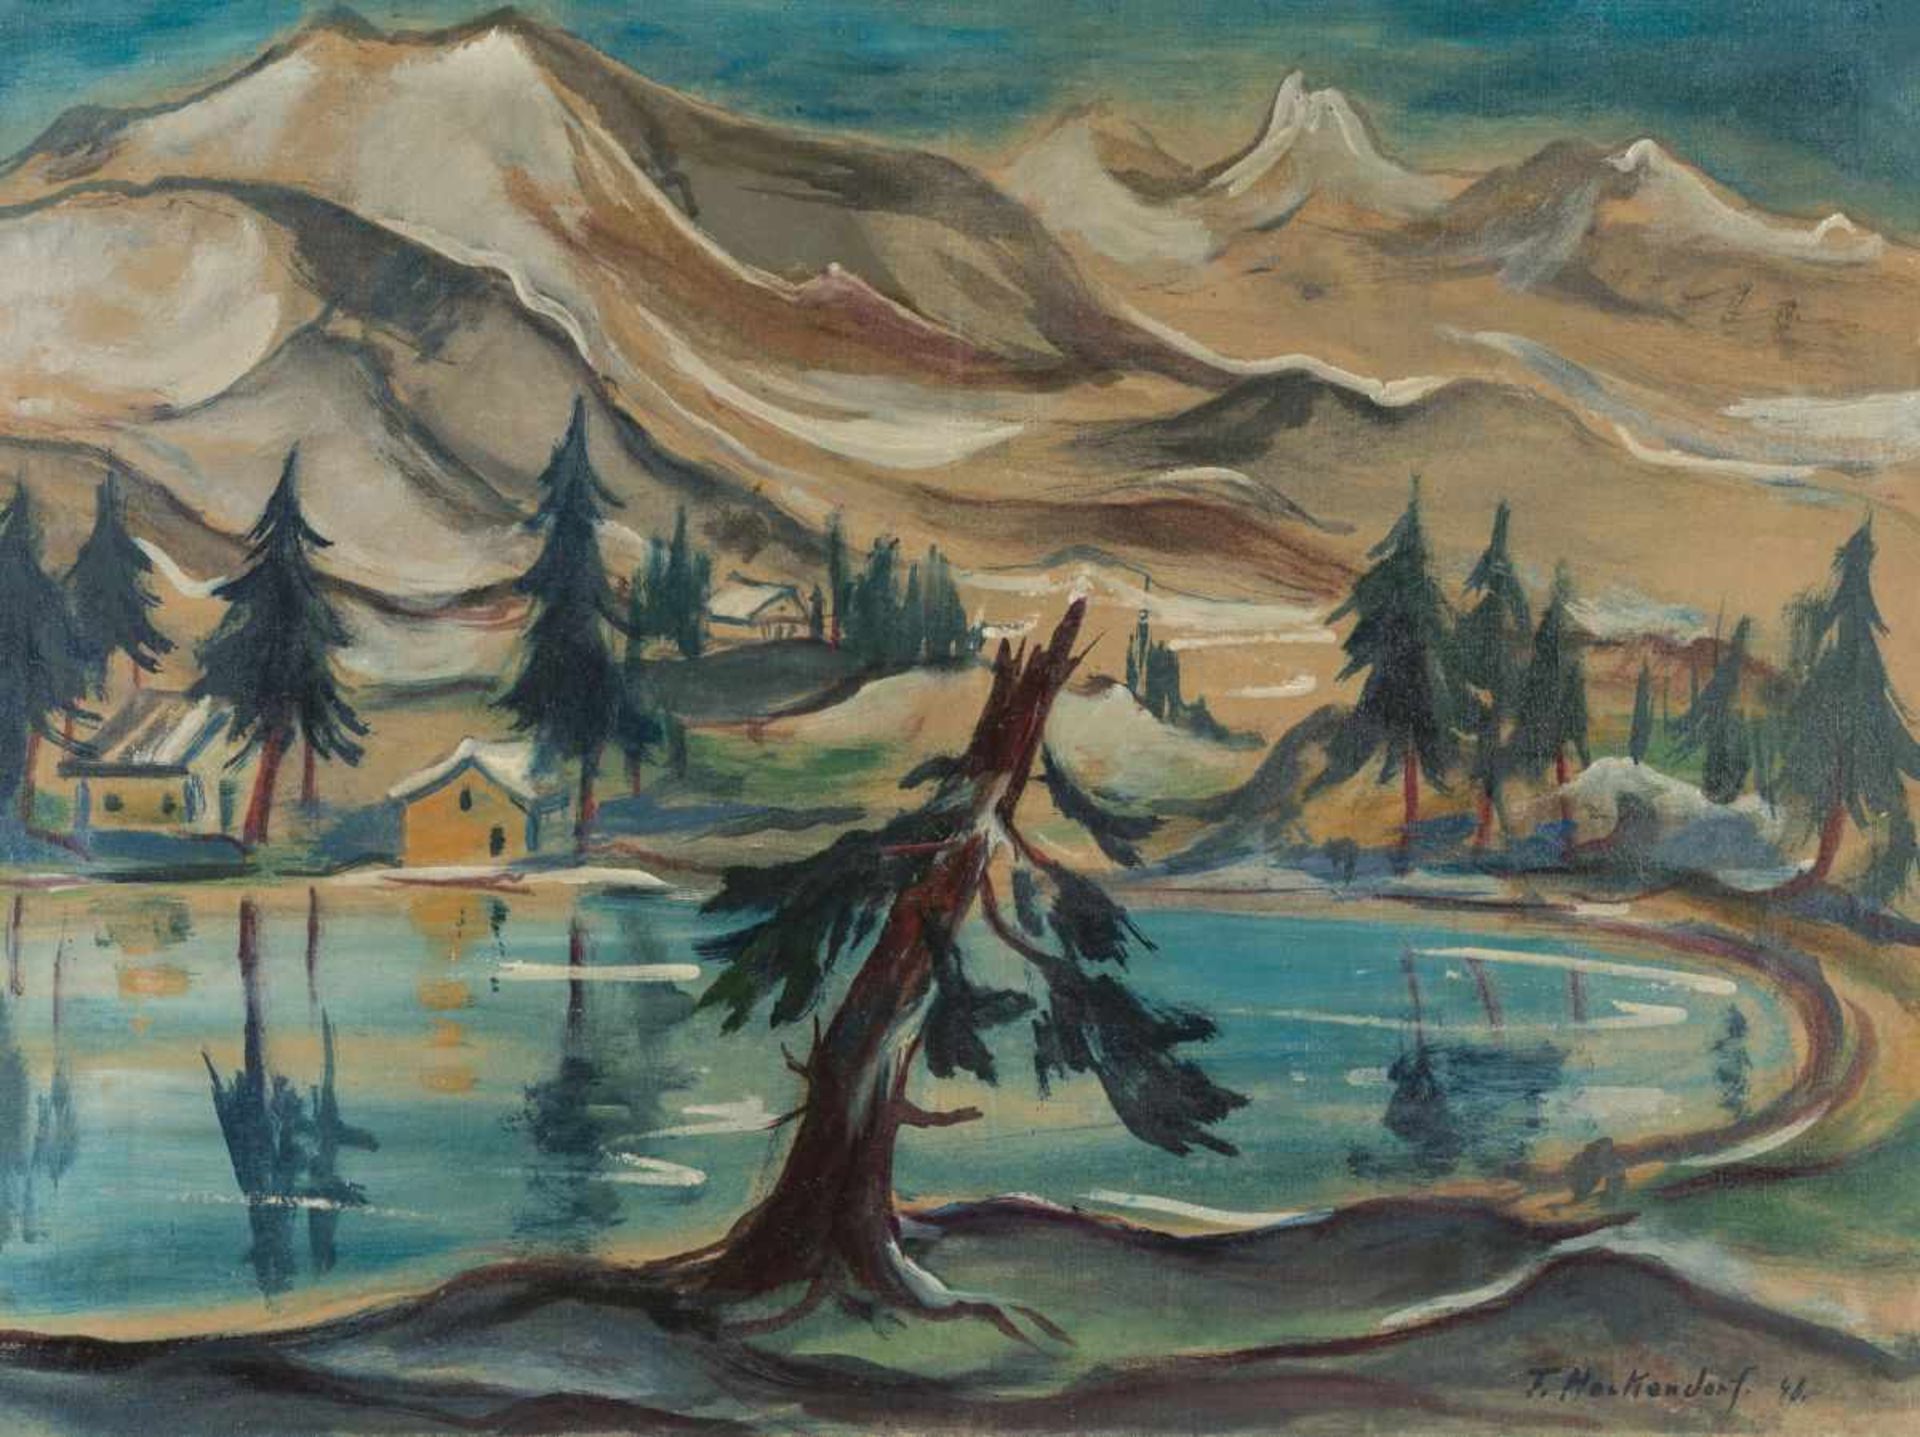 Heckendorf, FranzMountain Lake, 1948Oil on Canvassigned and dated lower right19,9 x 32,2 inrental